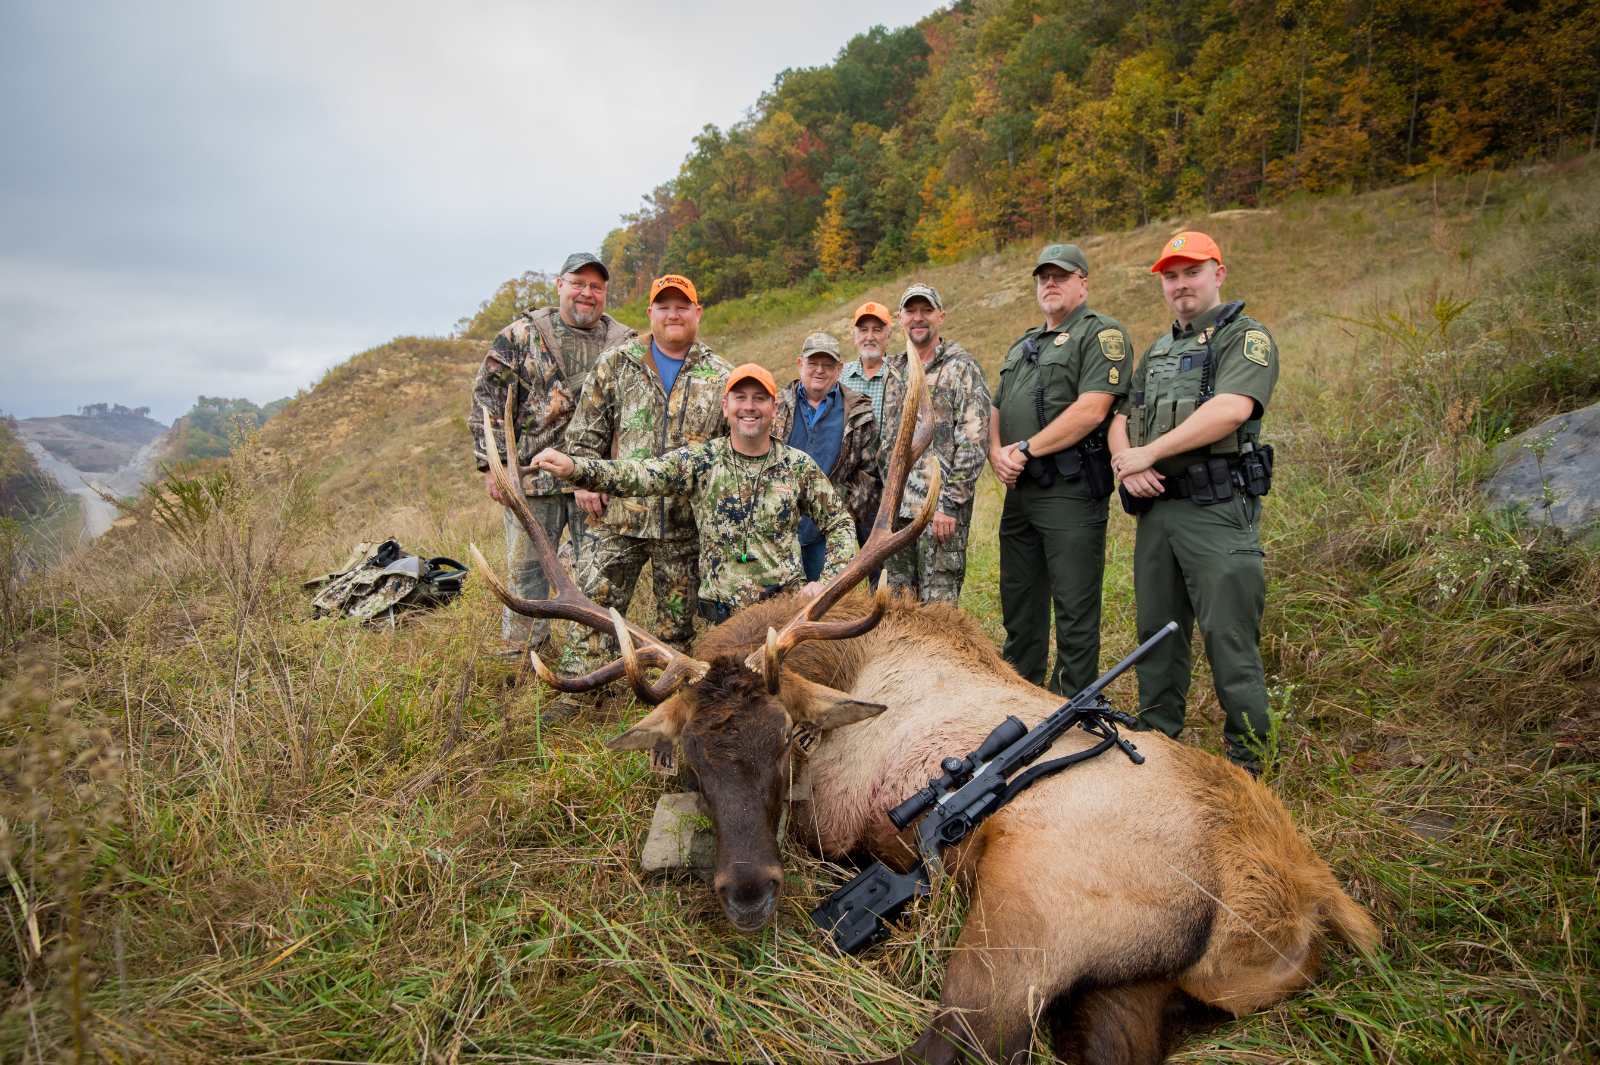 A photo taken of six hunters in camoflague and blaze orange posing with a large bull elk lying on the ground and two Conservation Police Officers in uniform.